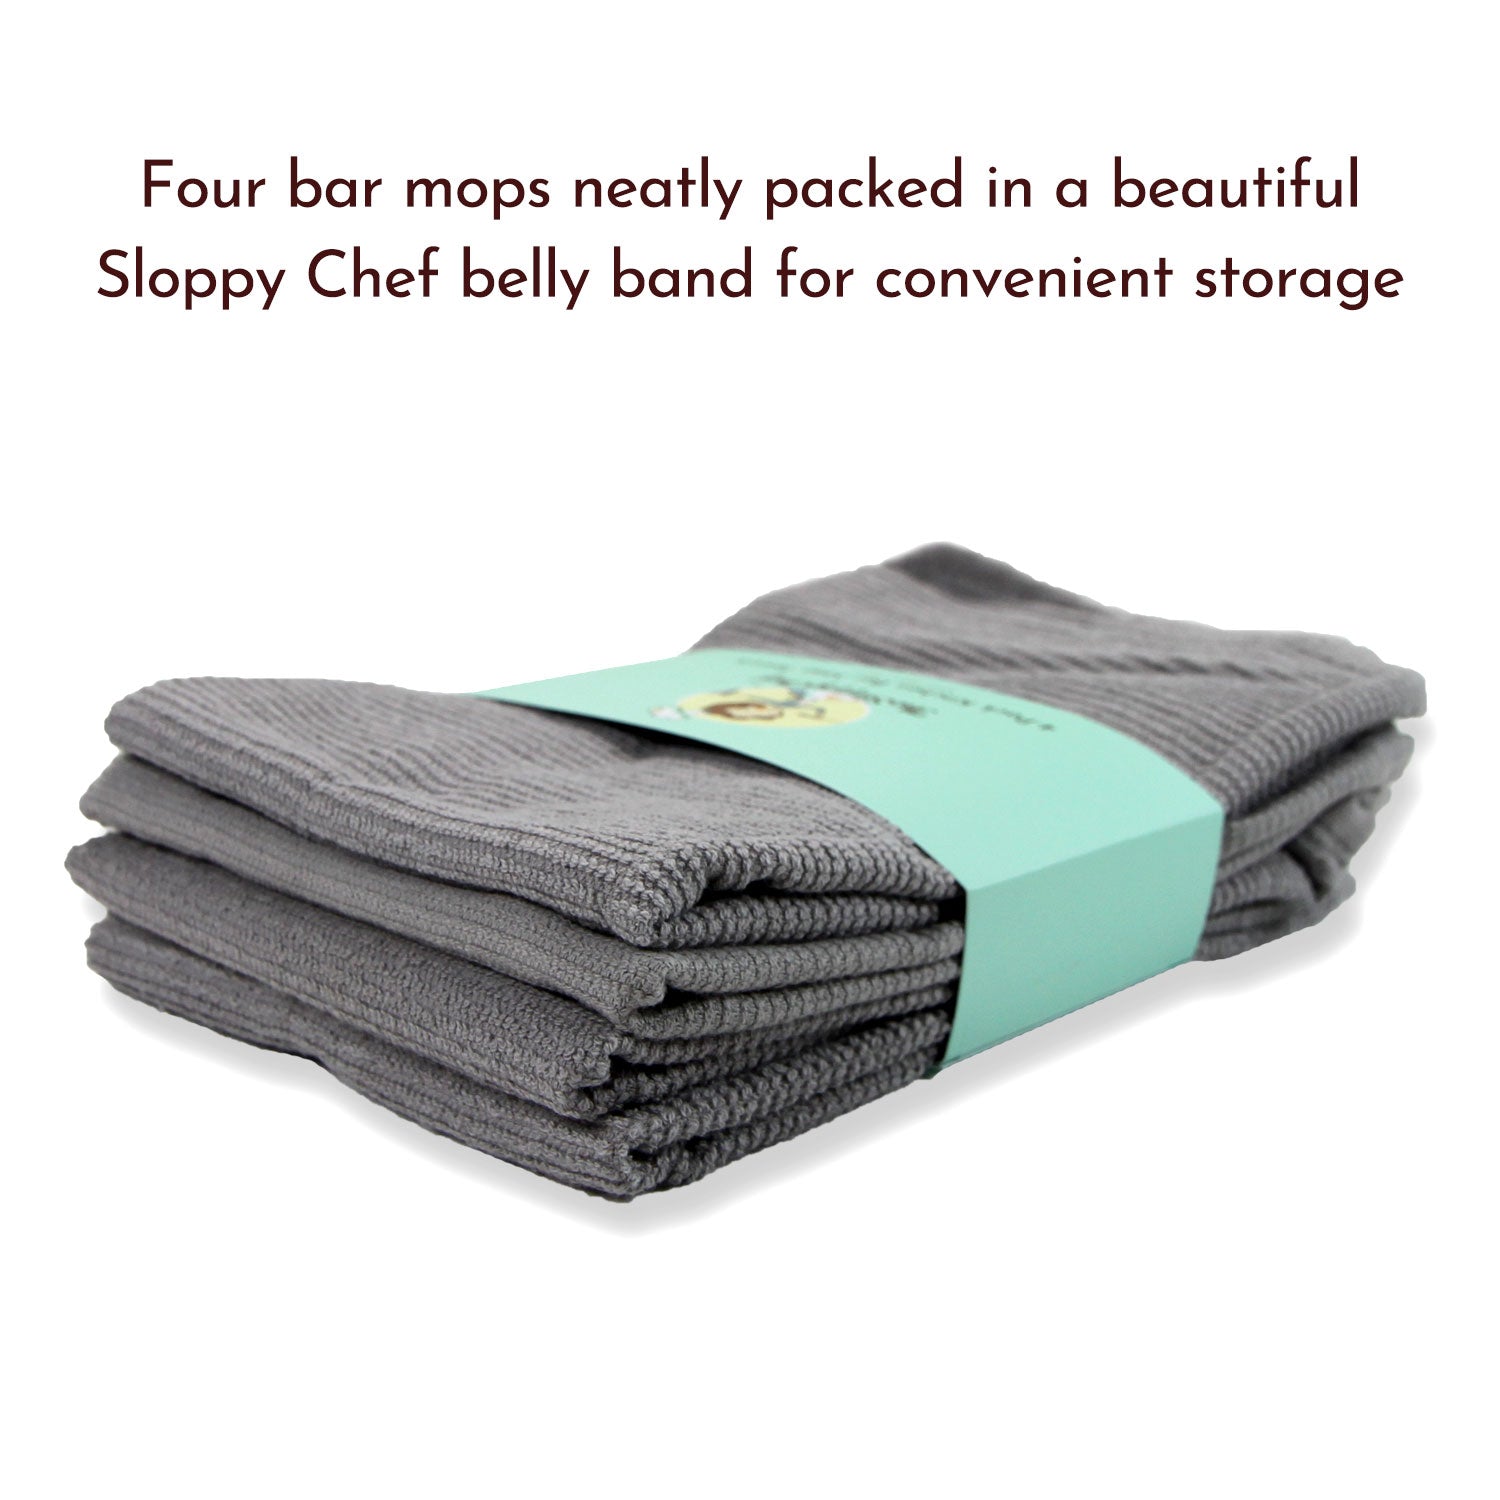 Bulk Case of 192 Bar Mop Kitchen Towels, 16x19 in., Assorted